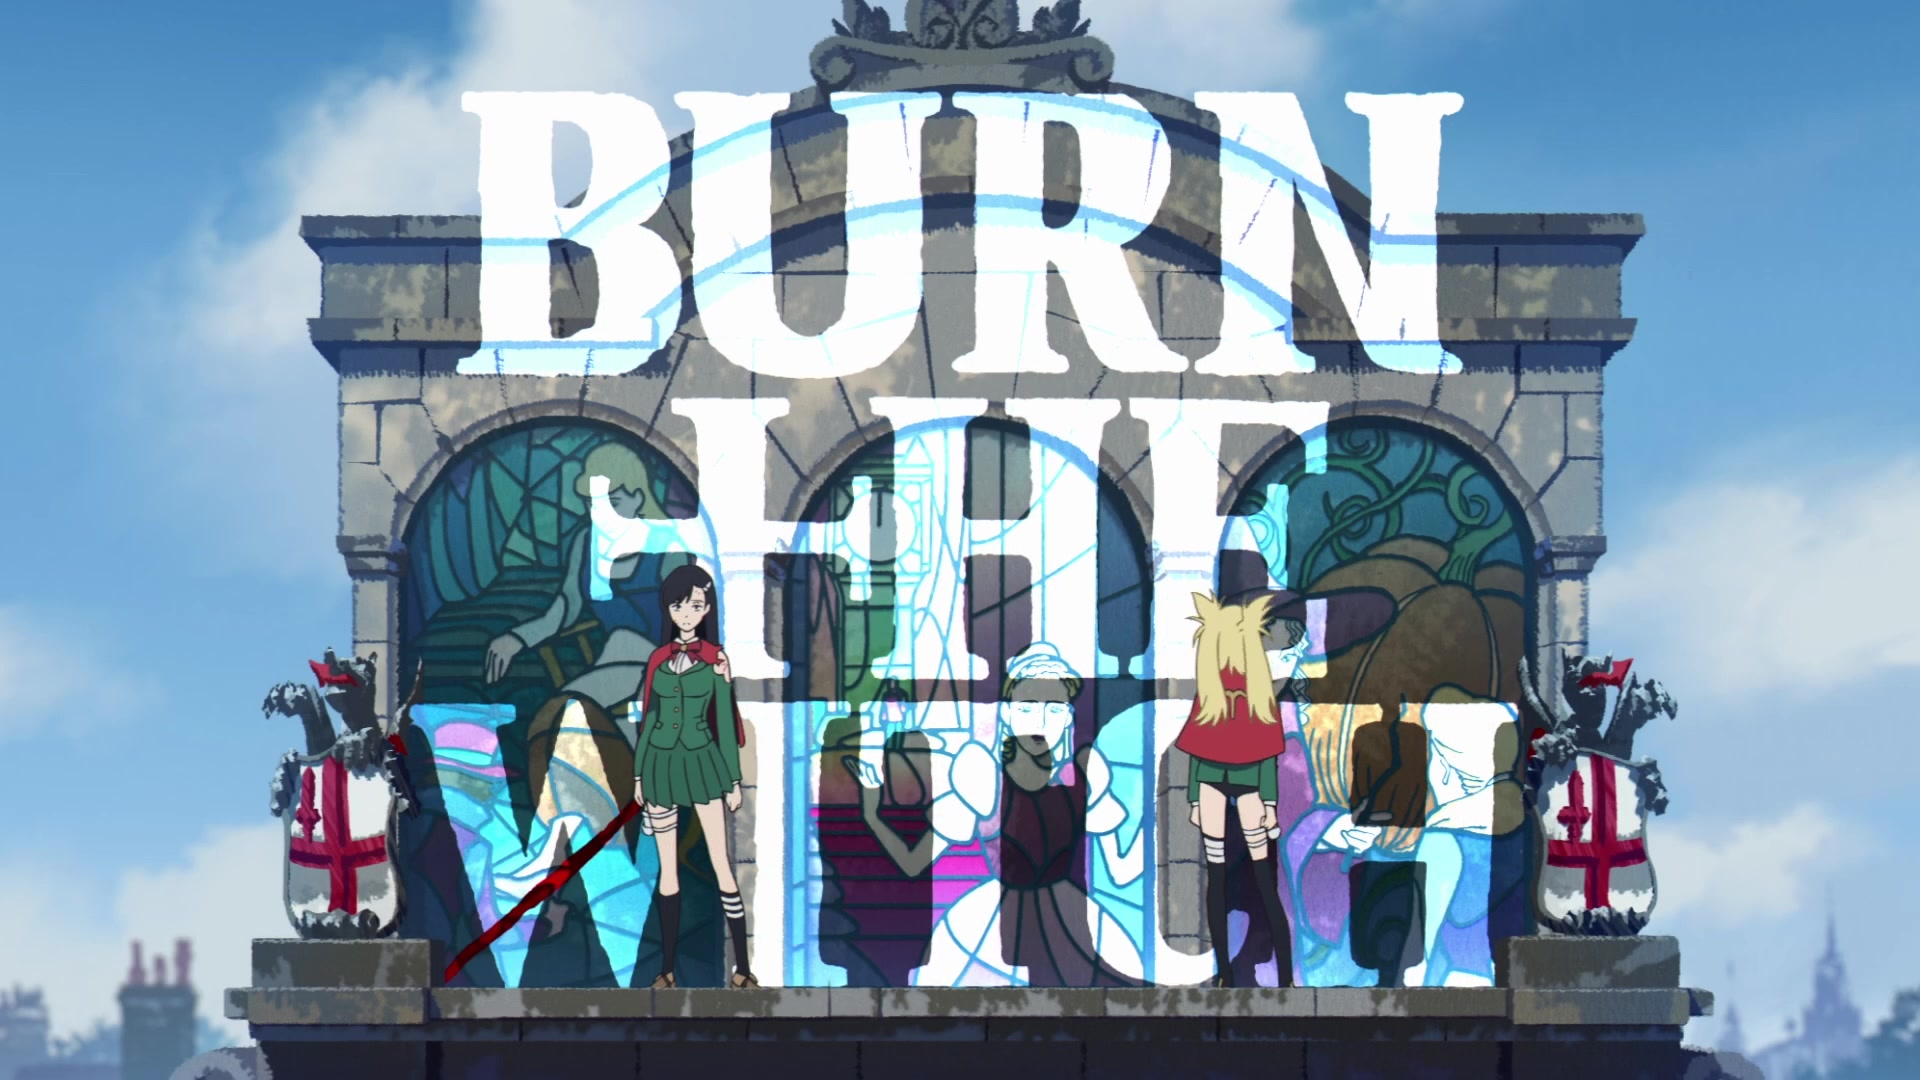 Burn The Witch